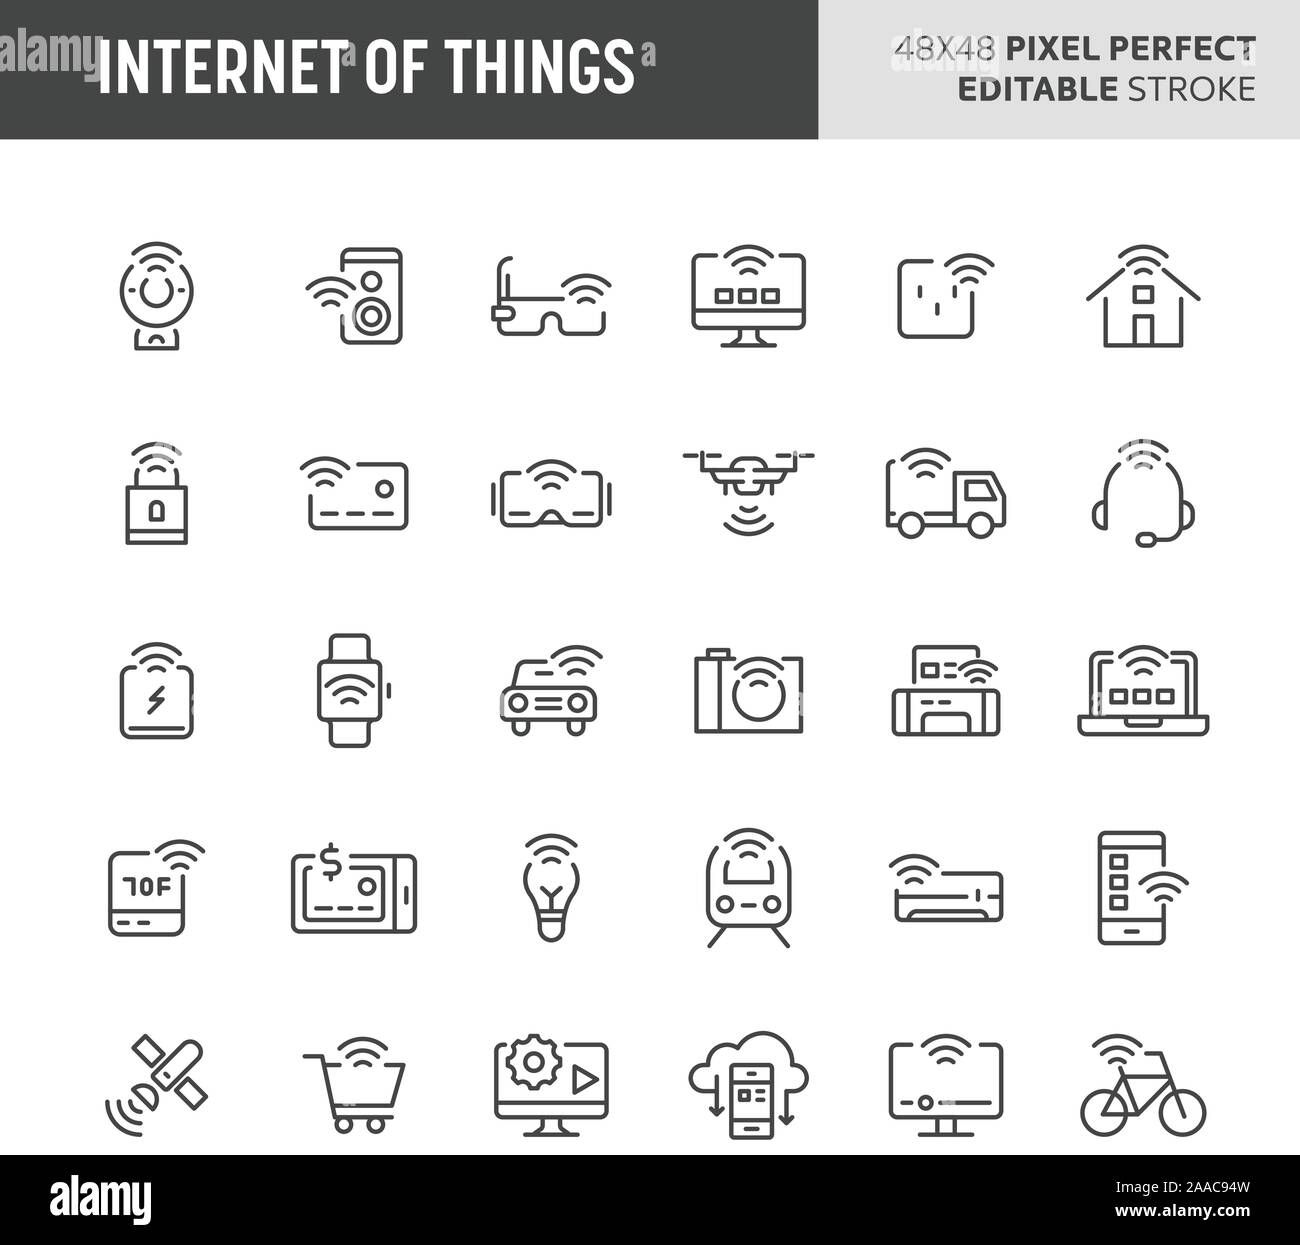 30 thin line icons associated with internet of things (IoT). Symbols such as network, devices, home appliances and vehicles are included in this set. Stock Vector